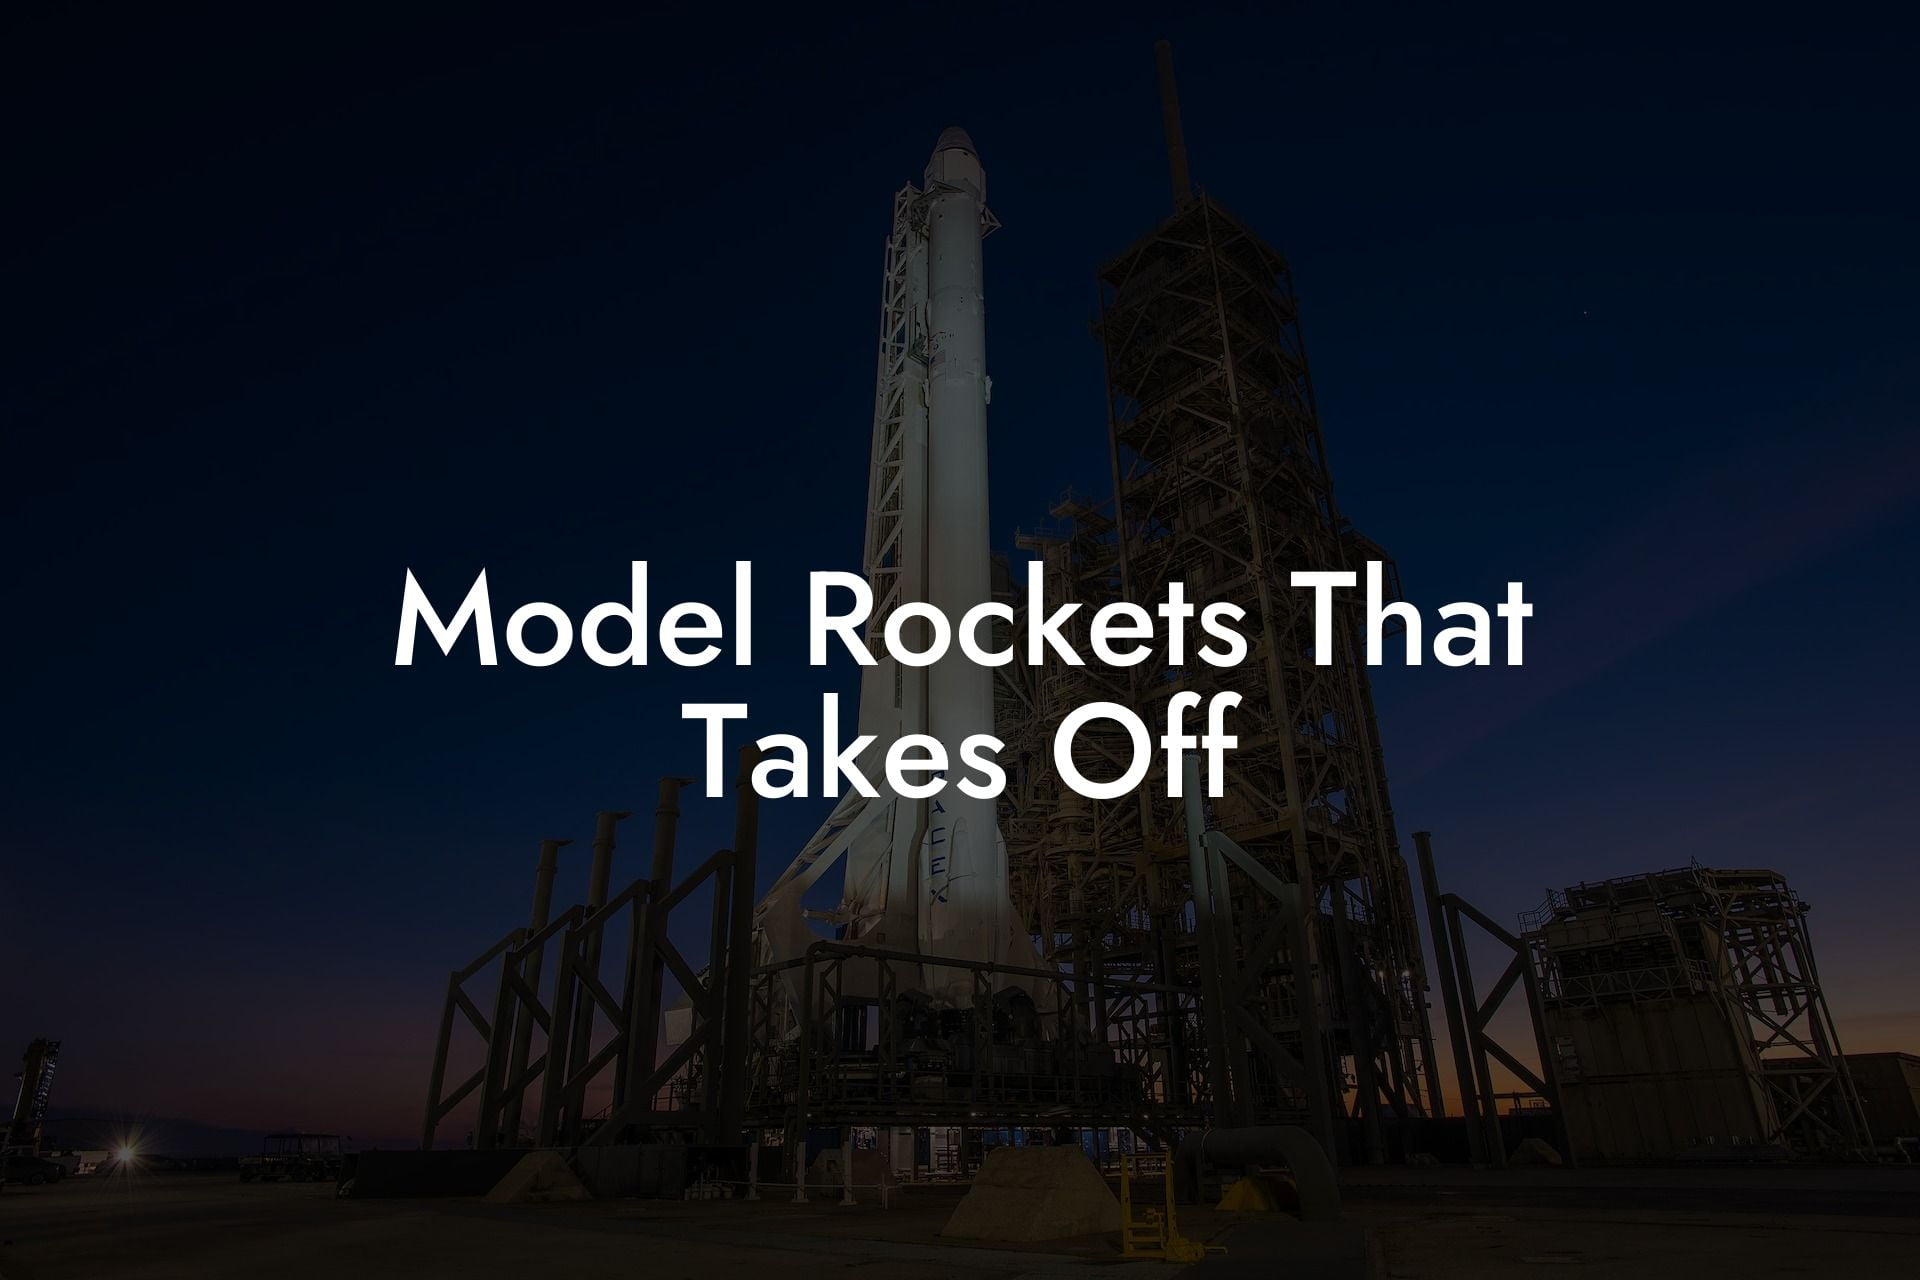 Model Rockets That Takes Off